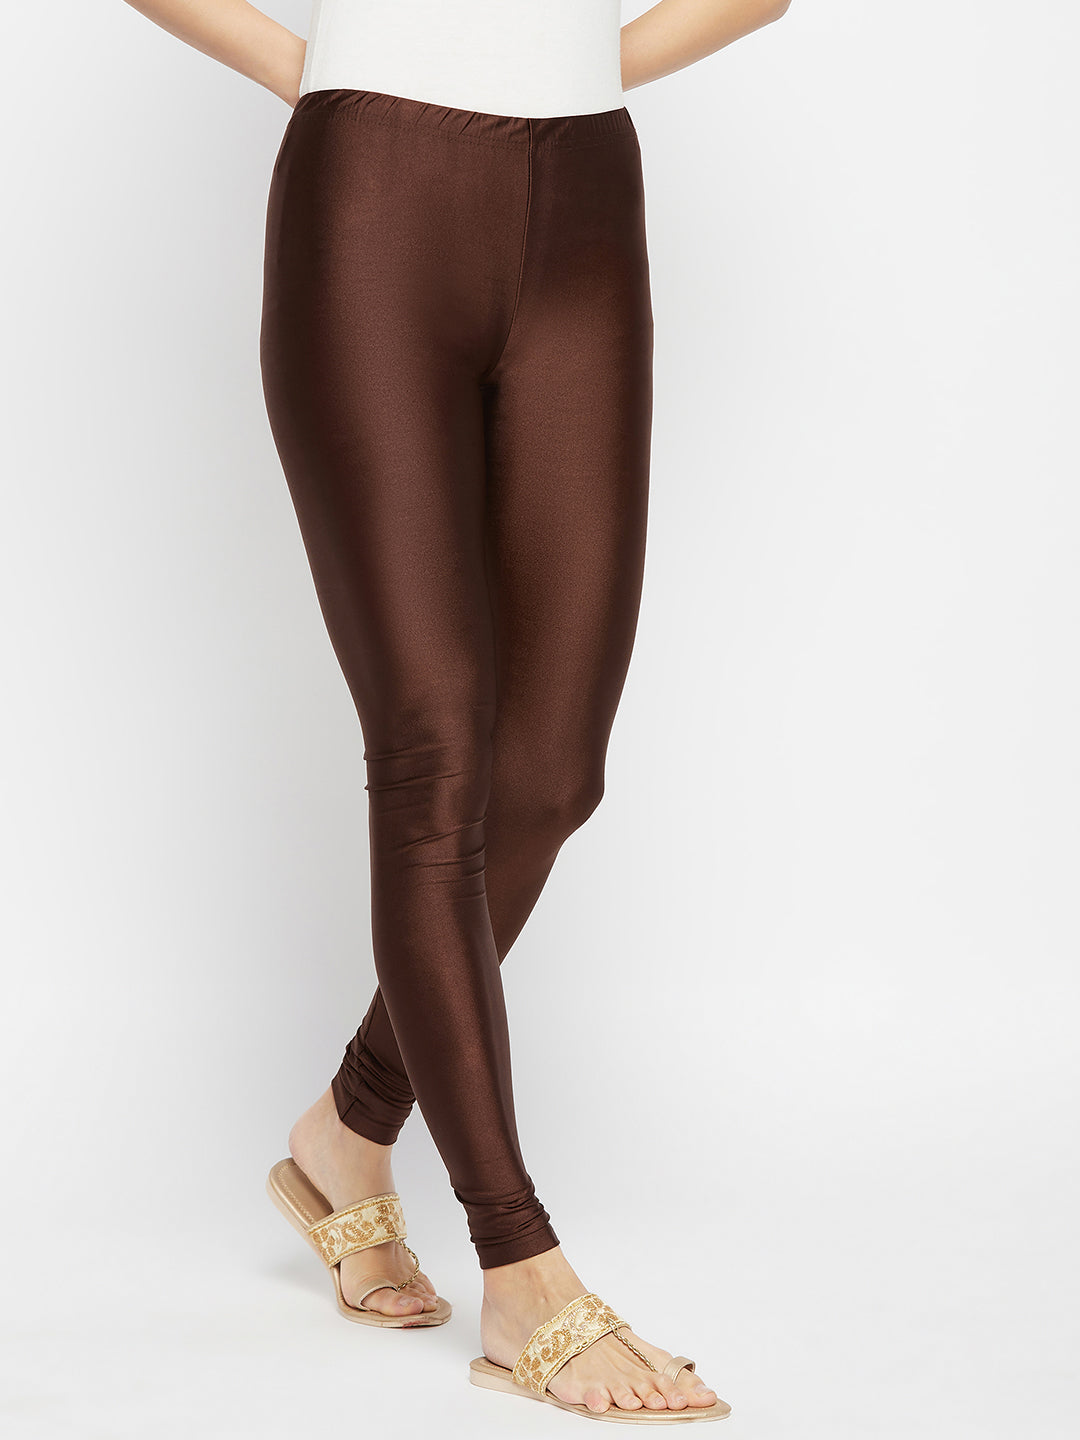 Footed Ethnic Wear Legging with Metallic touch